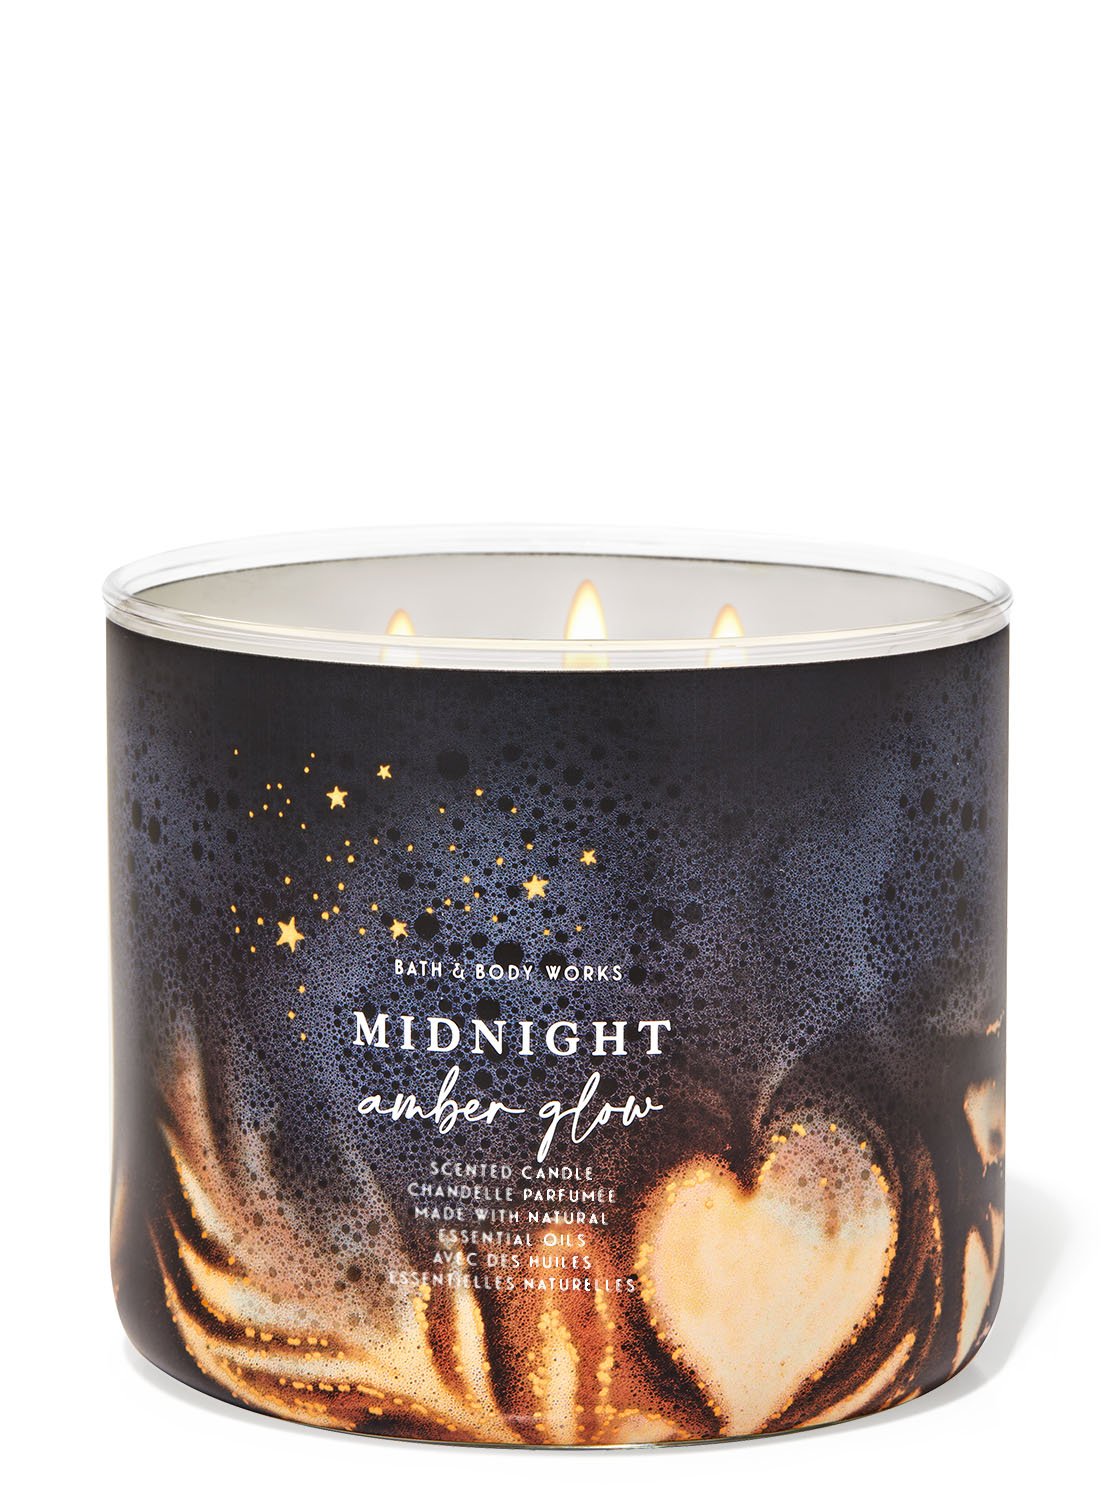 Midnight Amber Glow 3-Wick Candle | Bath and Body Works